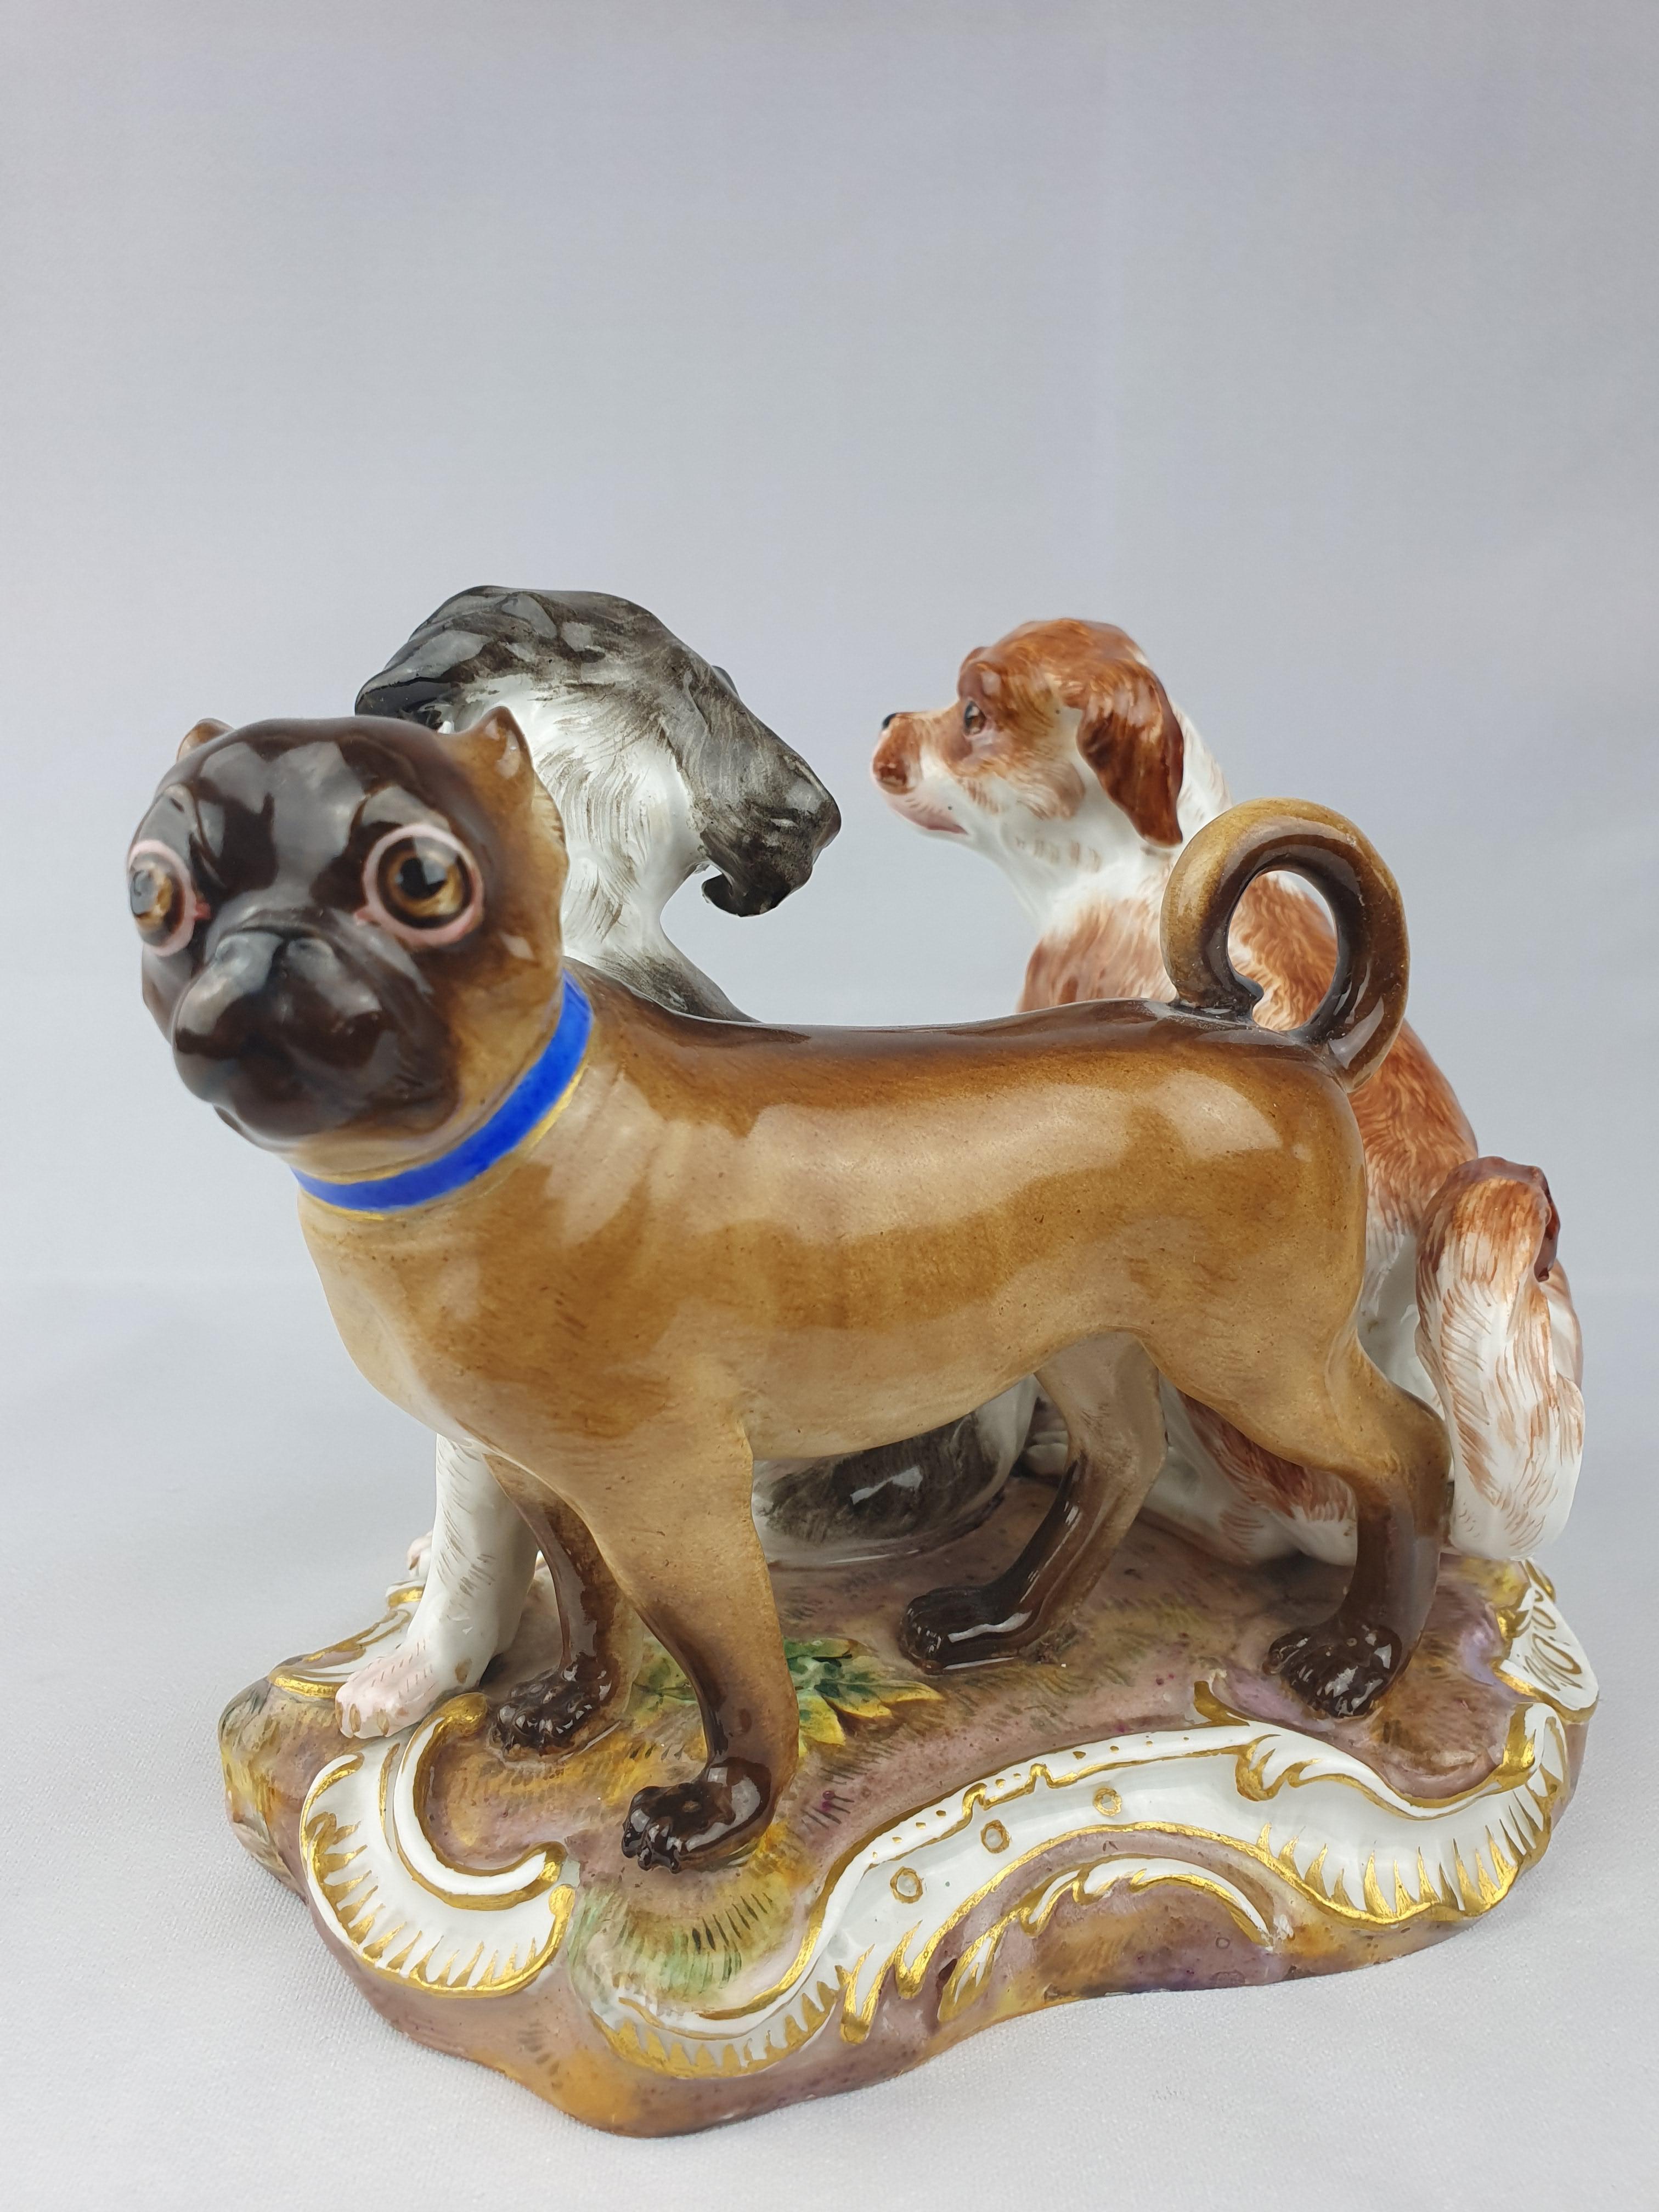 Meissen Group of Three Dogs two Bolognese Spaniels and a Pug dog sat on a grassy mound base.- Modelled by Kaendler.

circa 1850.
Height 14cm / 5.5inch.